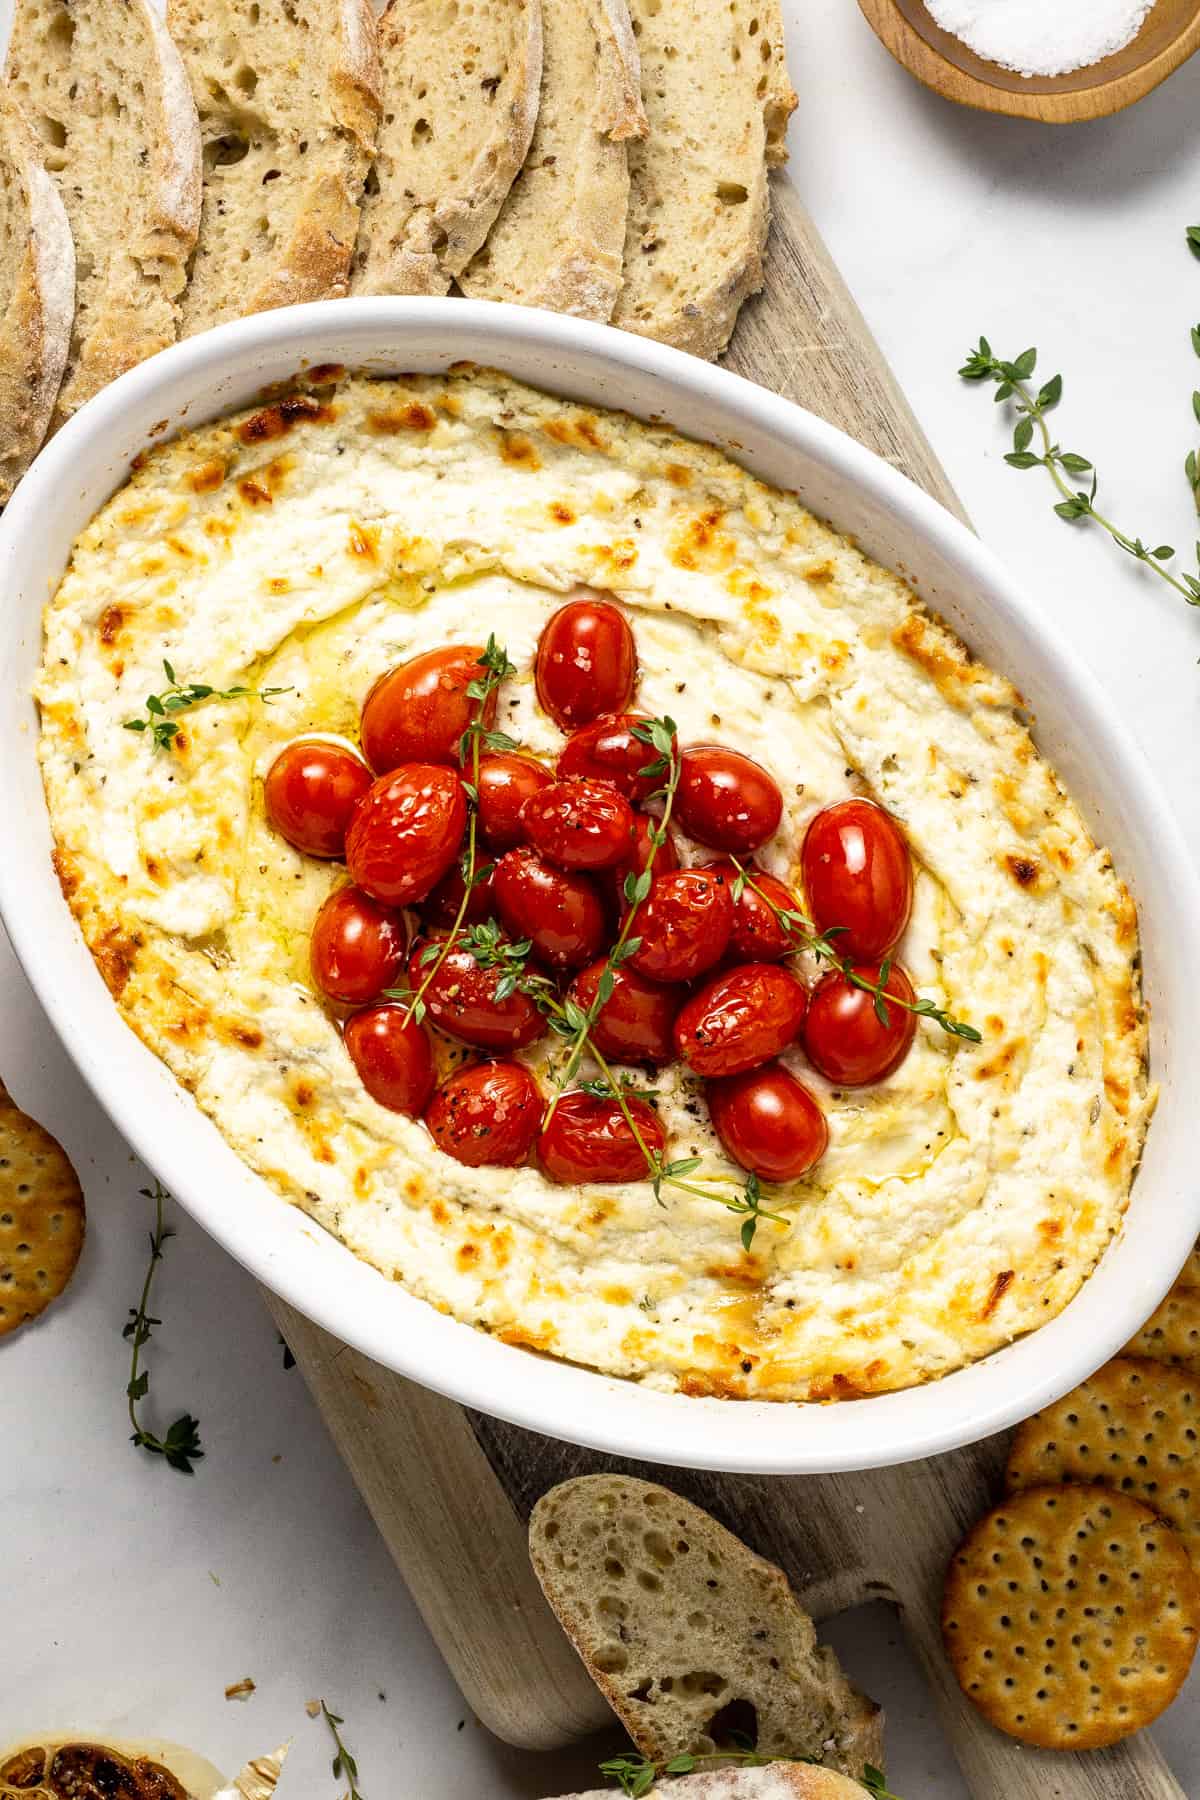 Overshot shot of baked goat cheese dip garnished with fresh thyme